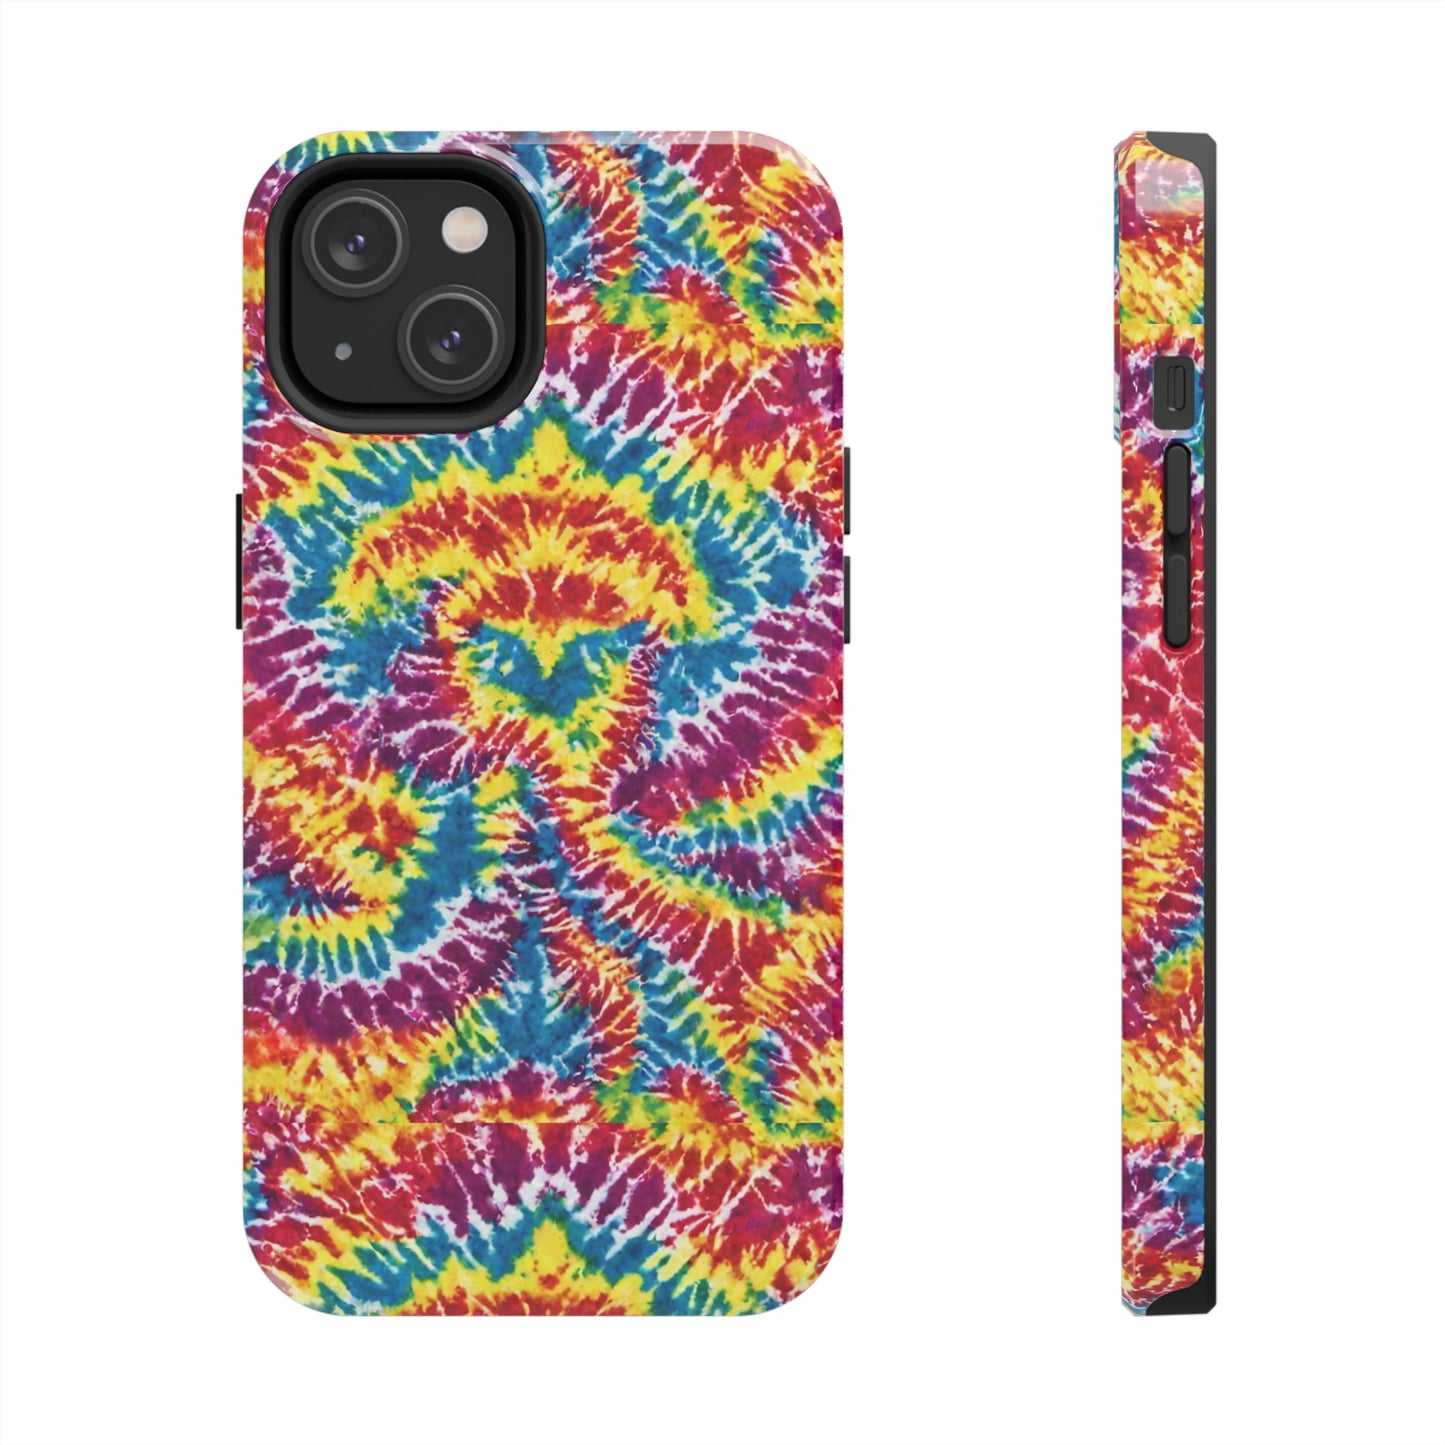 Psychedelic Phone Protector